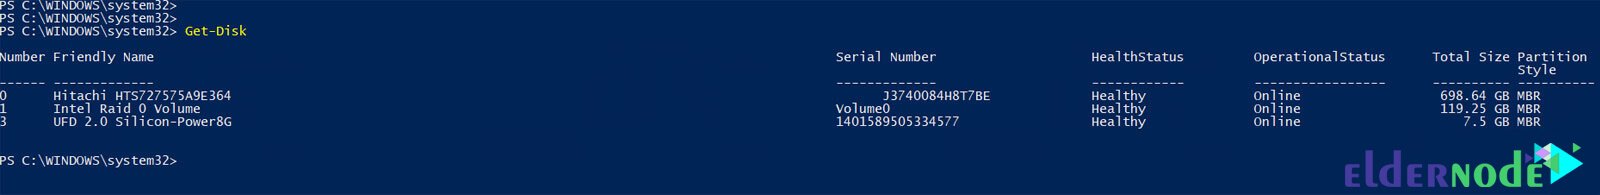 PowerShell commands for working with hard disk